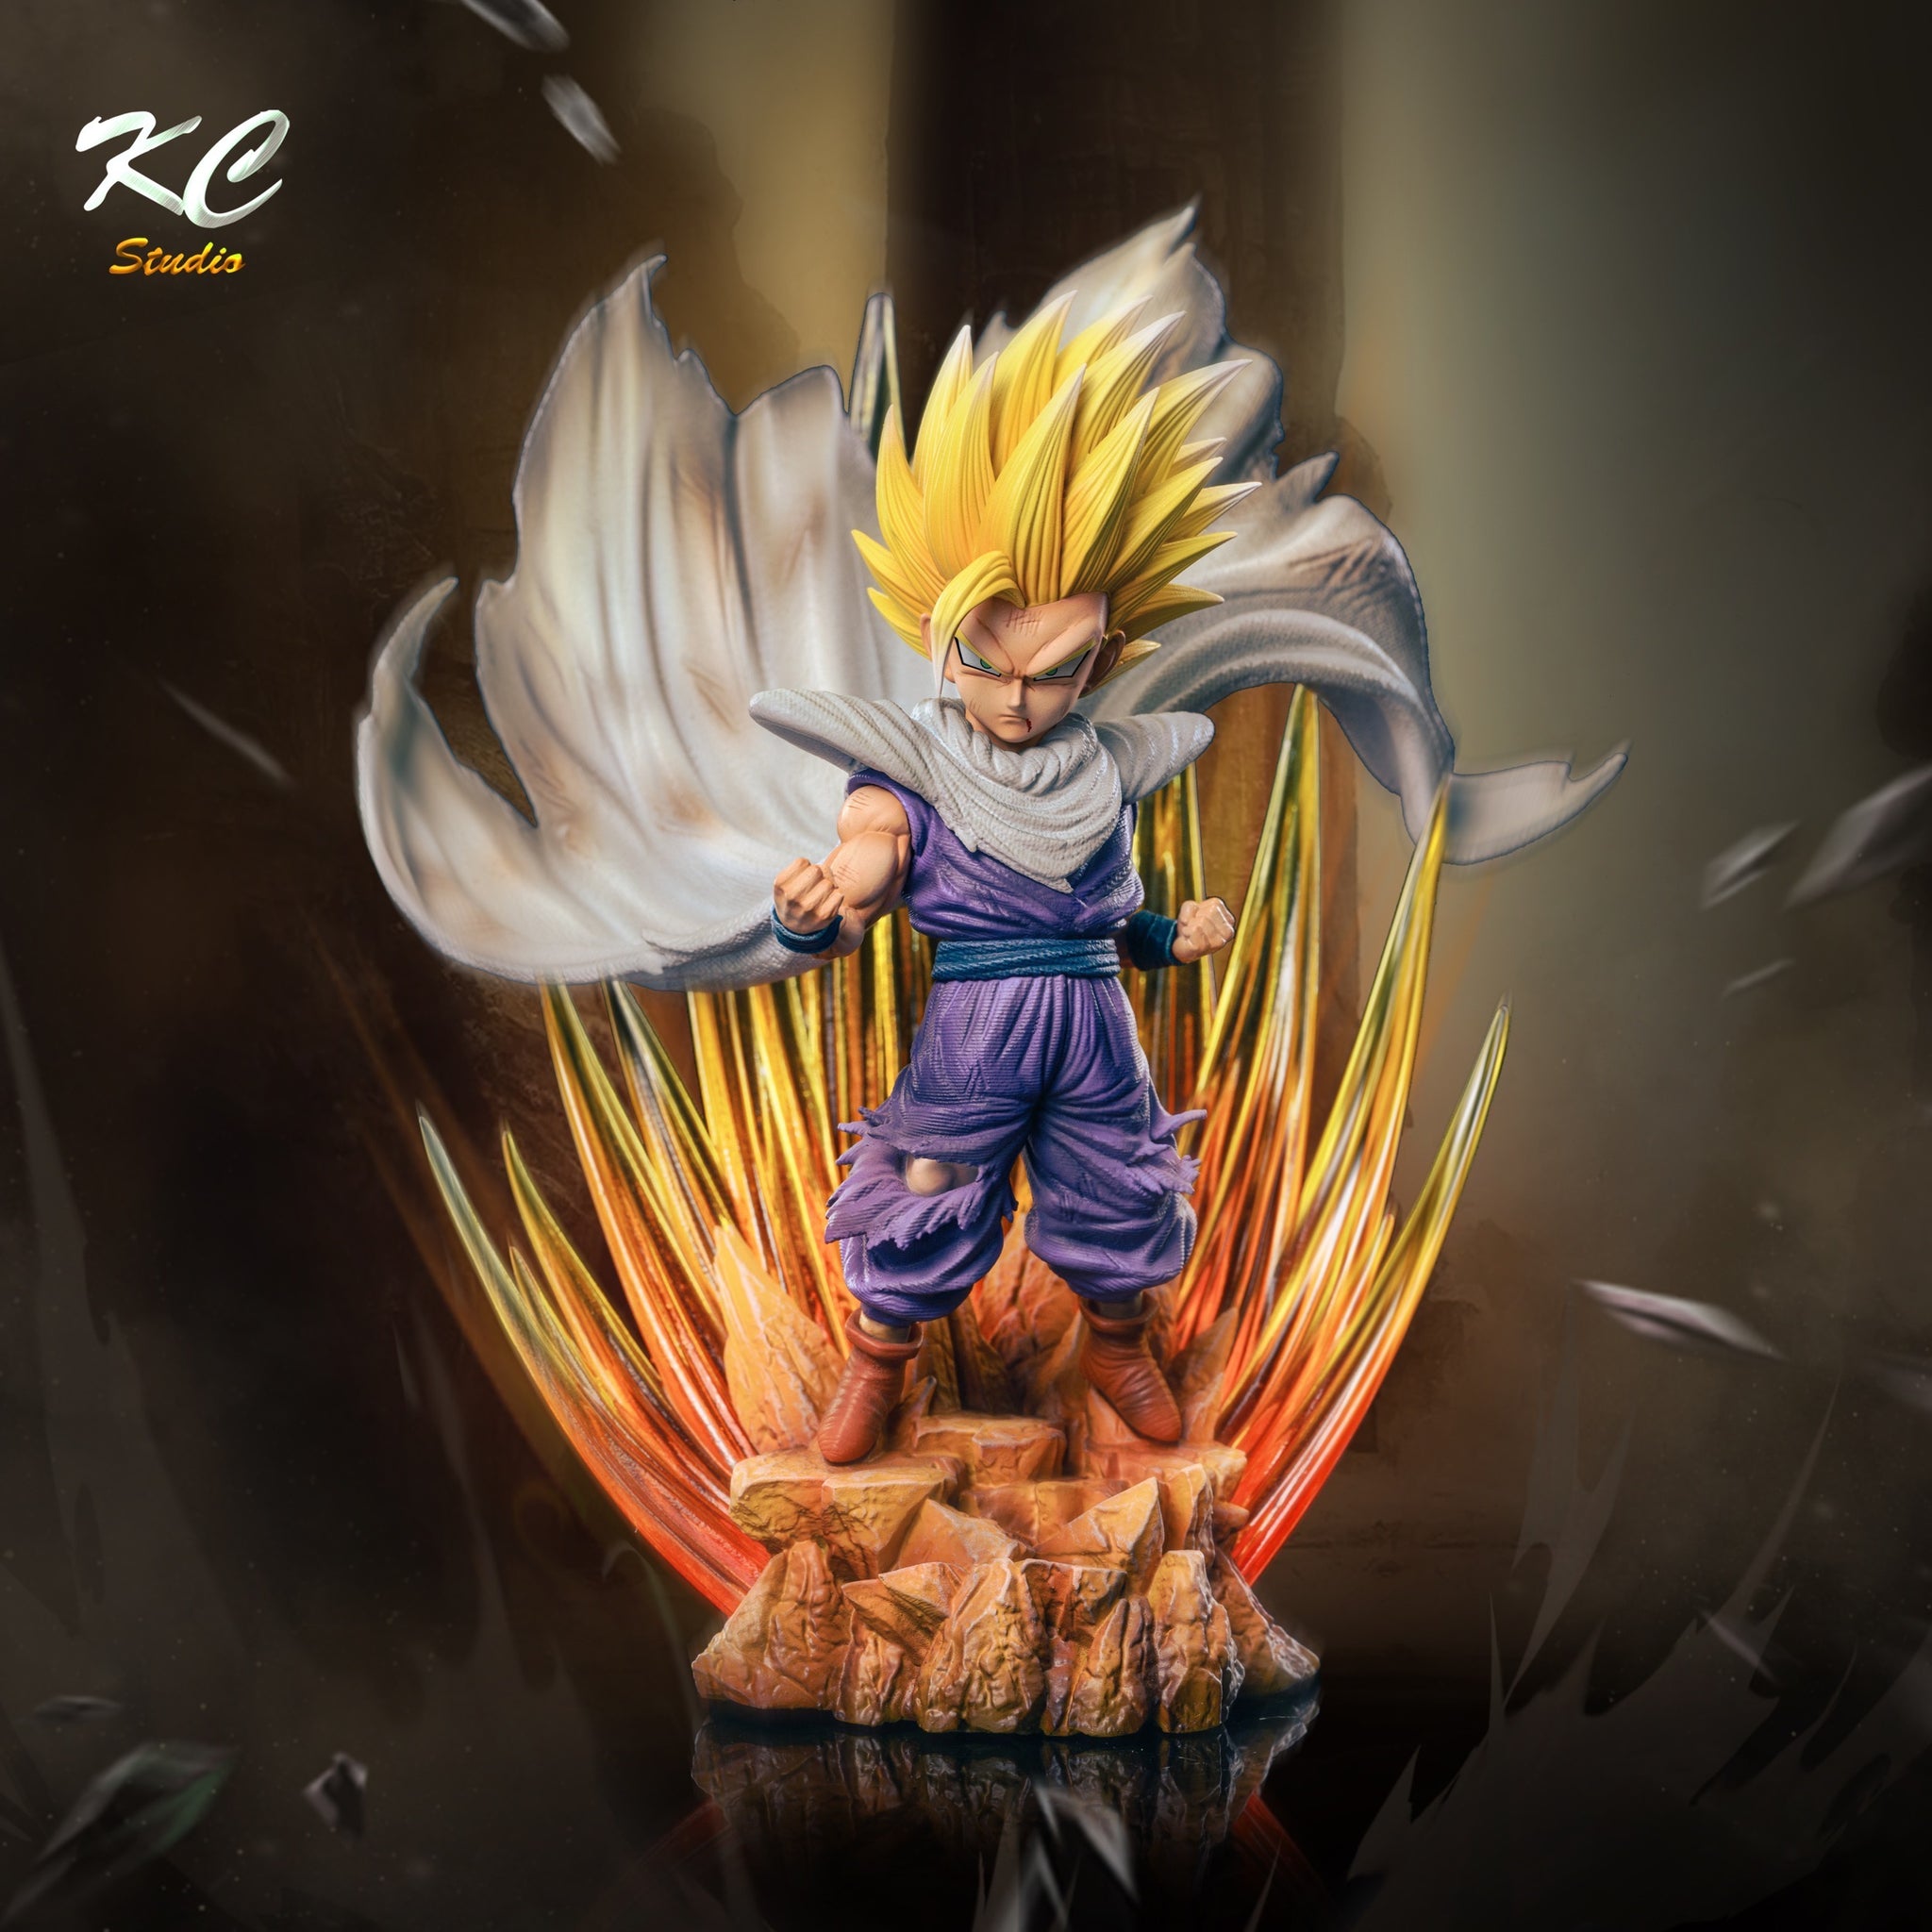 1/6 & 1/4 Scale Super Saiyan 4 Gogeta with LED - Dragon Ball Resin Statue -  ArmyAnt Studio [In Stock]